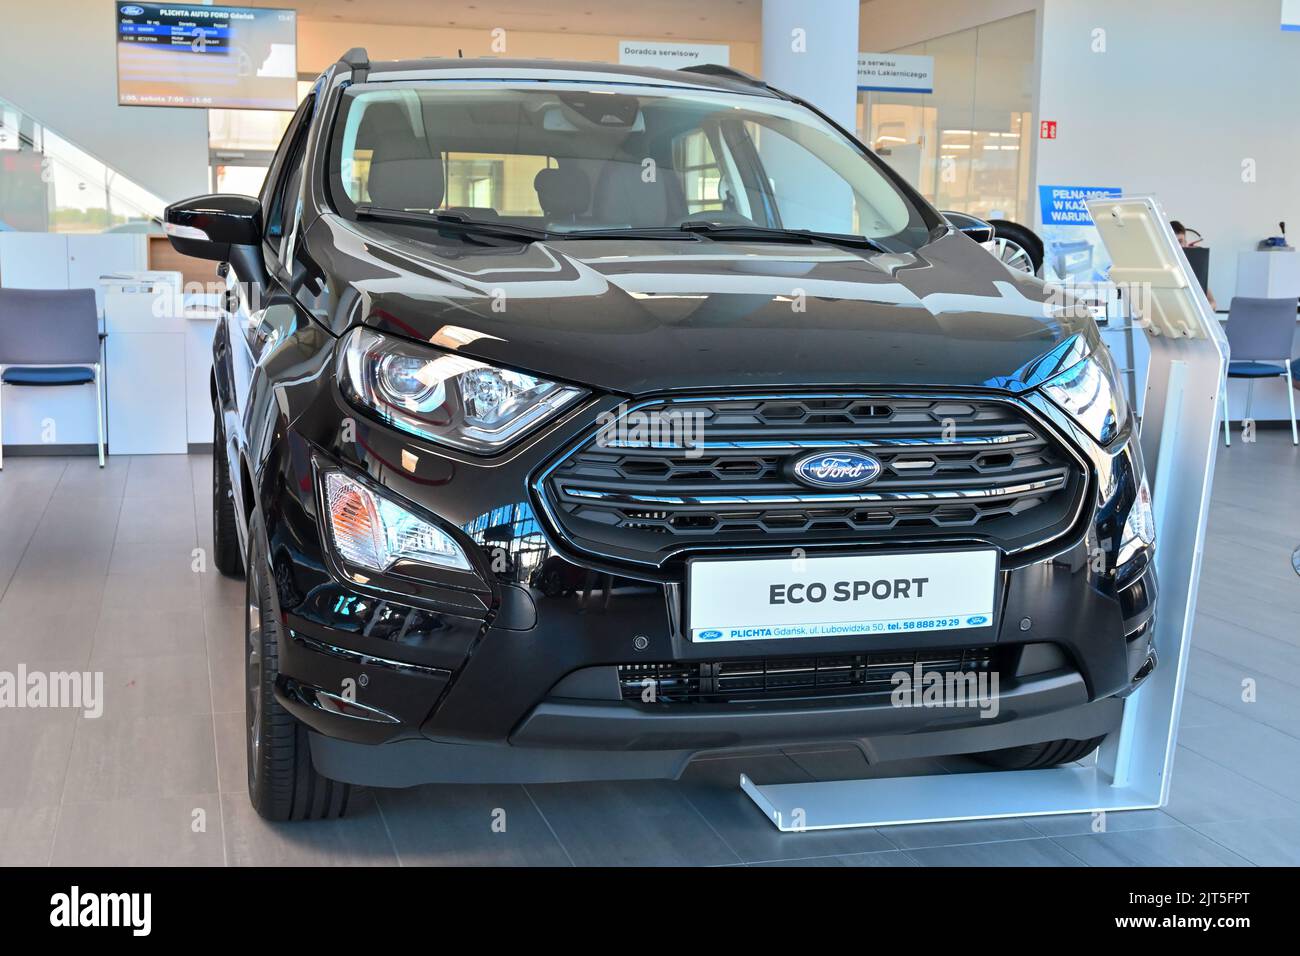 Gdansk, Poland - August 27, 2022: New model of Ford Eco Sport SUV presented in the car showroom of Gdansk Stock Photo